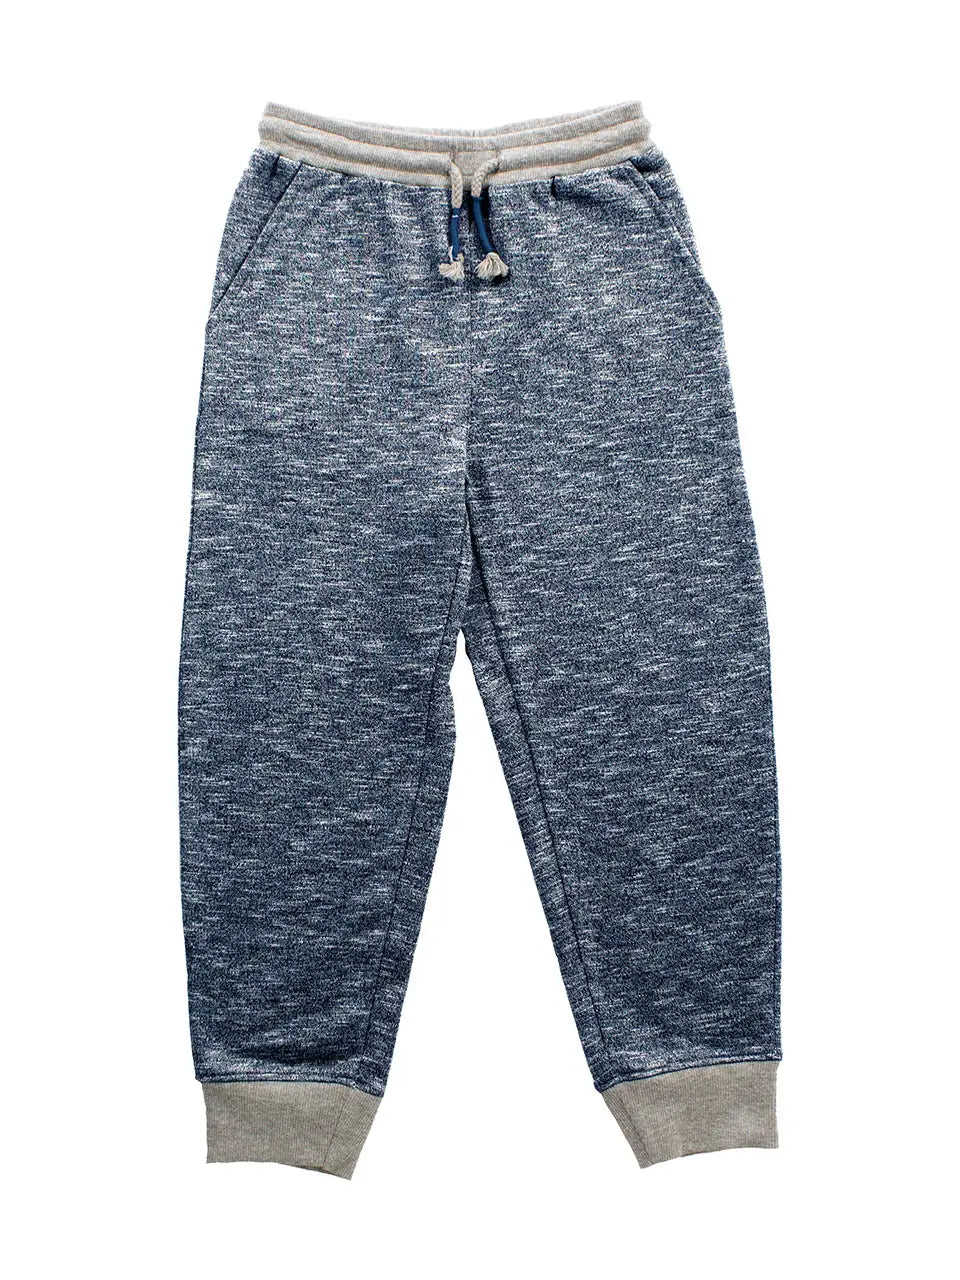 Charcoal & Navy Marbled Joggers